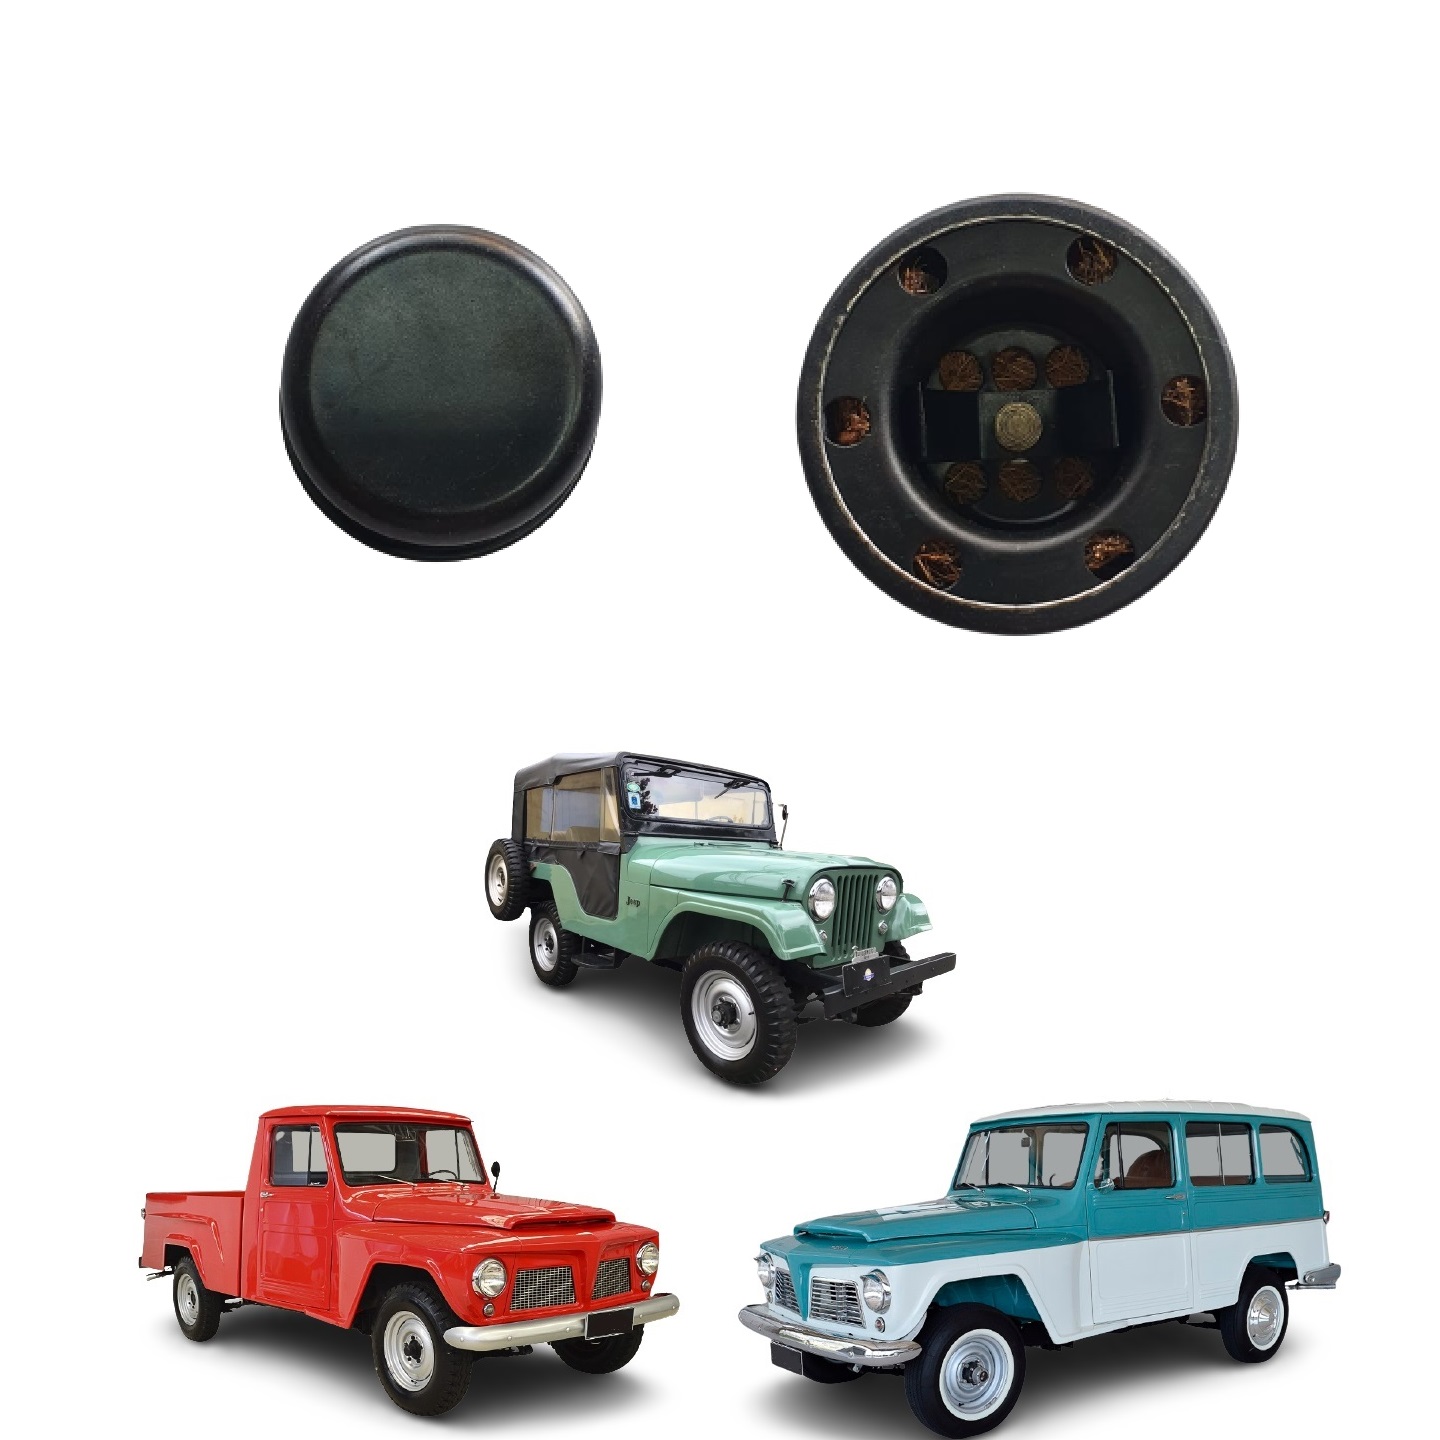 TAMPA DO OLEO DO MOTOR 6 CILINDROS FORD WILLYS JEEP RURAL F75 MAVERICK